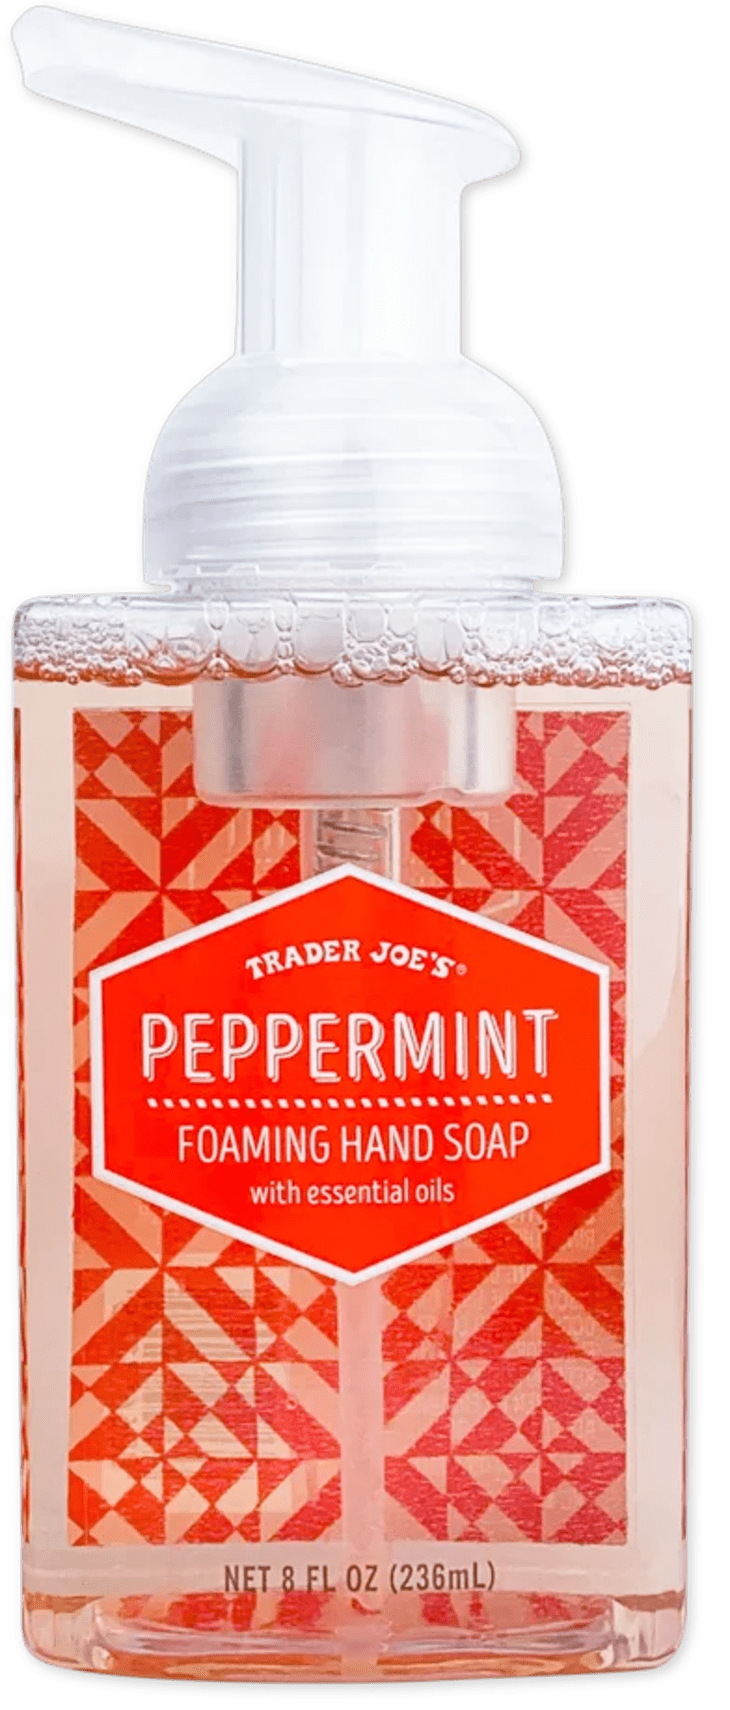 Peppermint Foaming Hand Soap at Trader Joe's